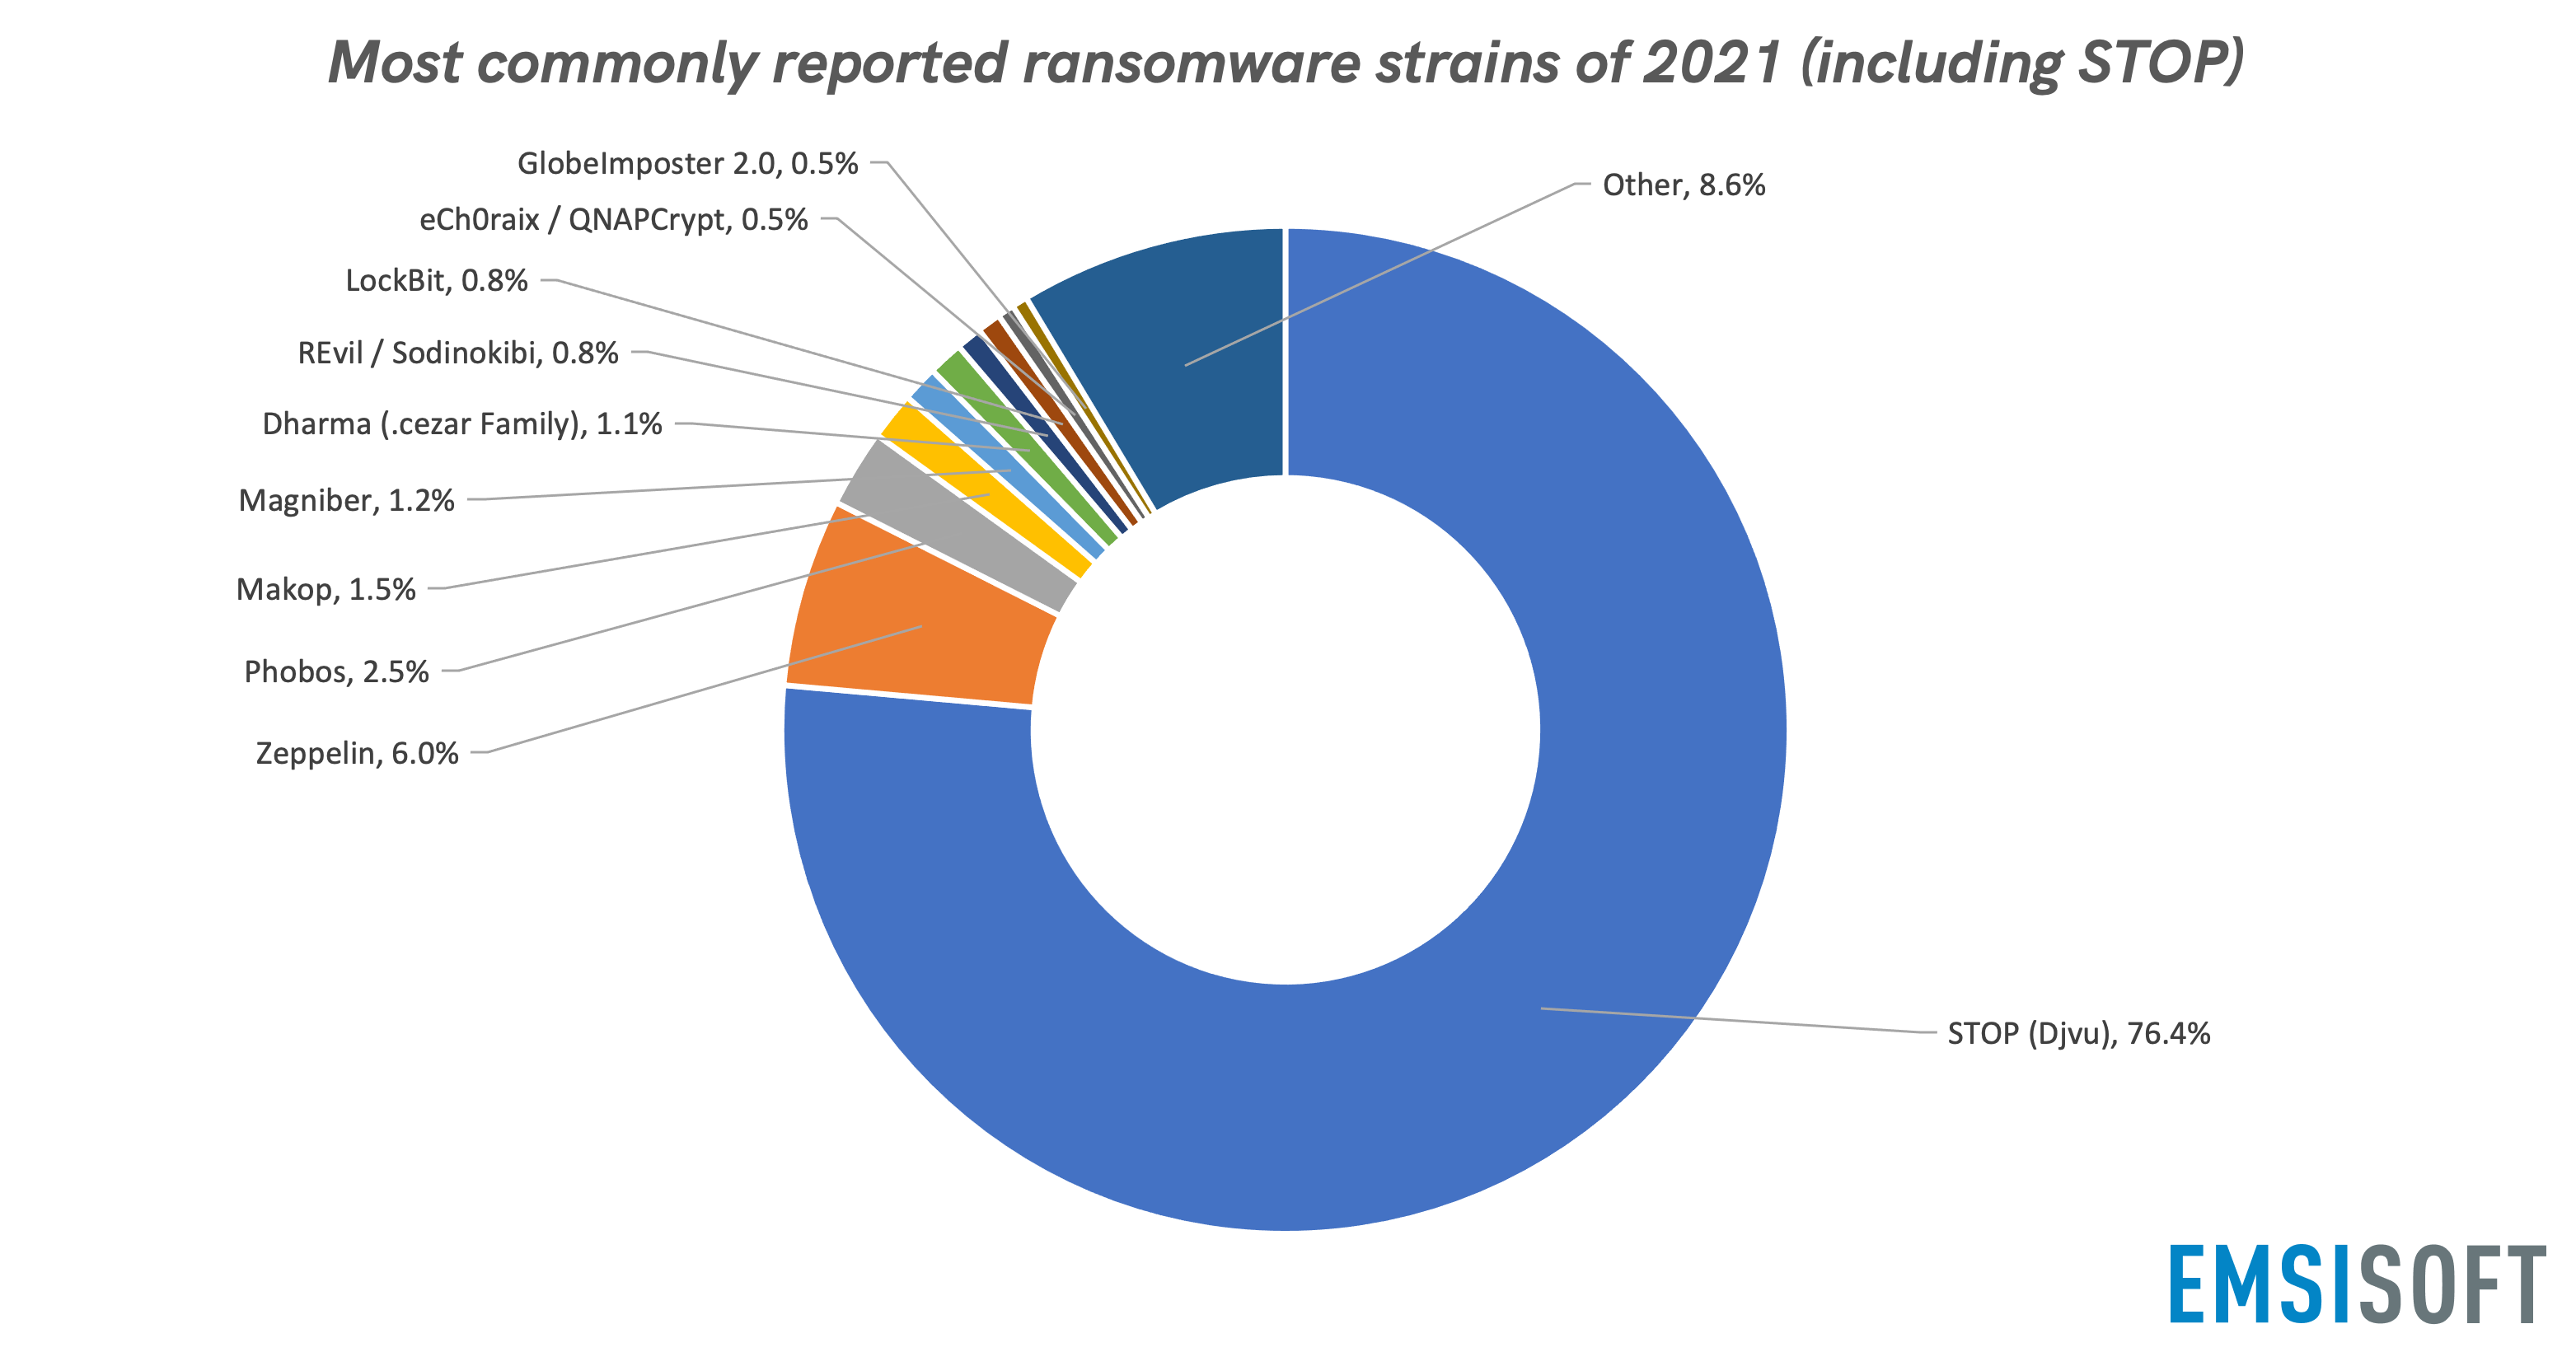 Most commonly reported ransomware strains of 2021 (including STOP)